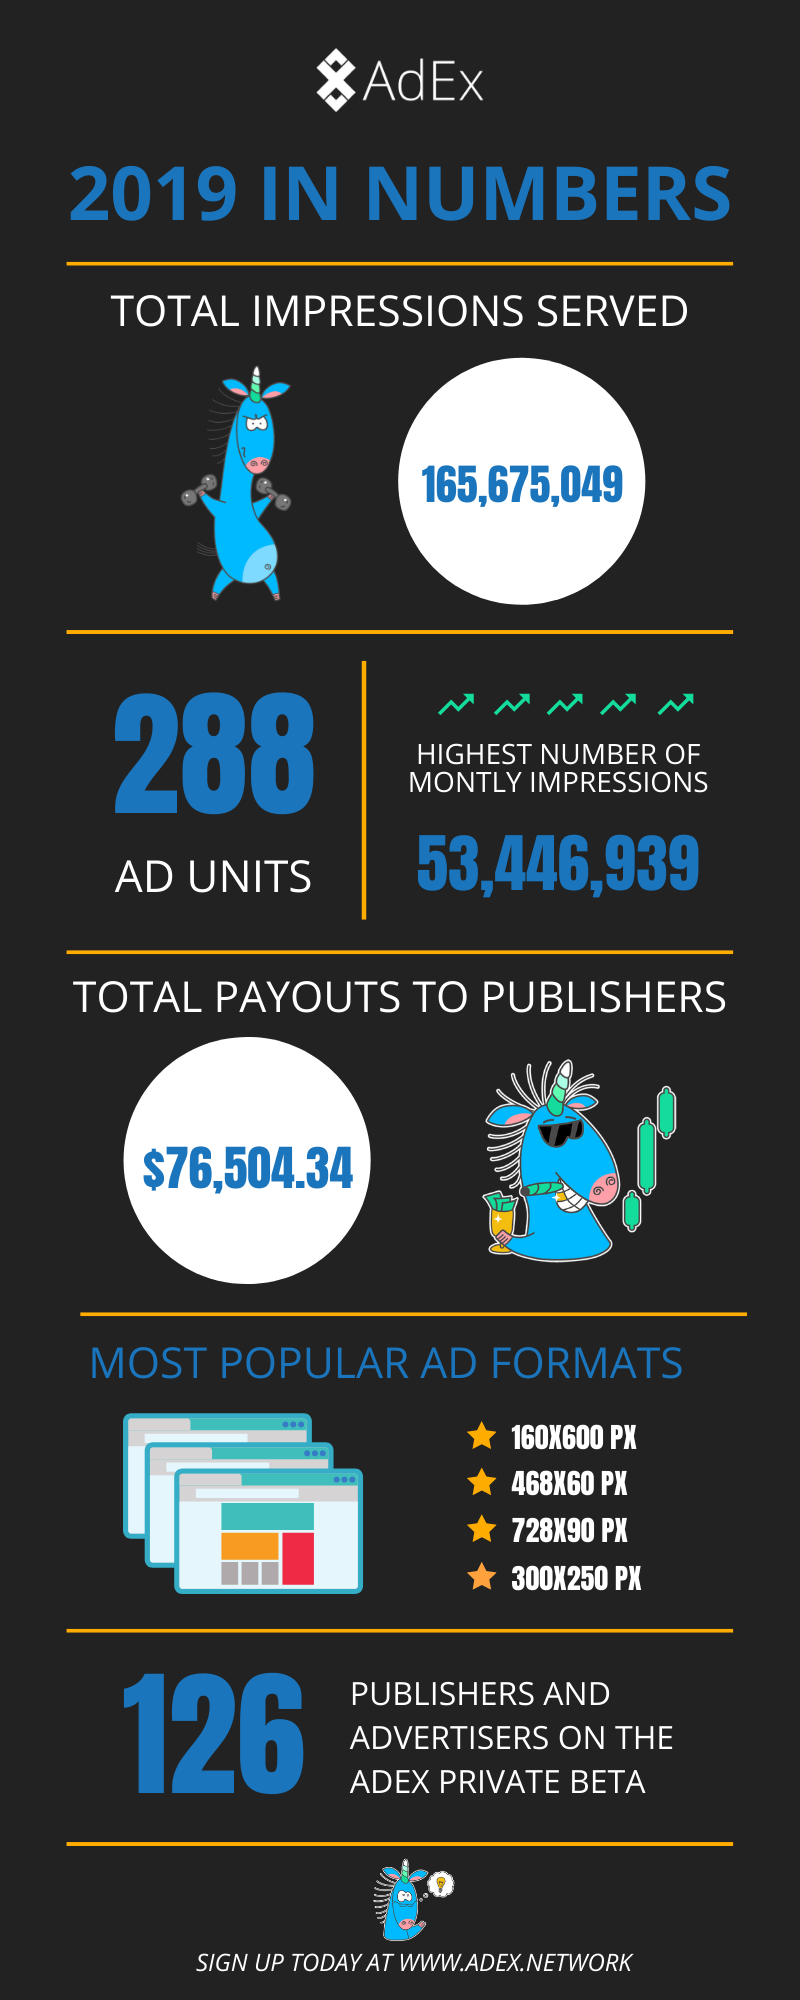 AdEx in numbers in 2019